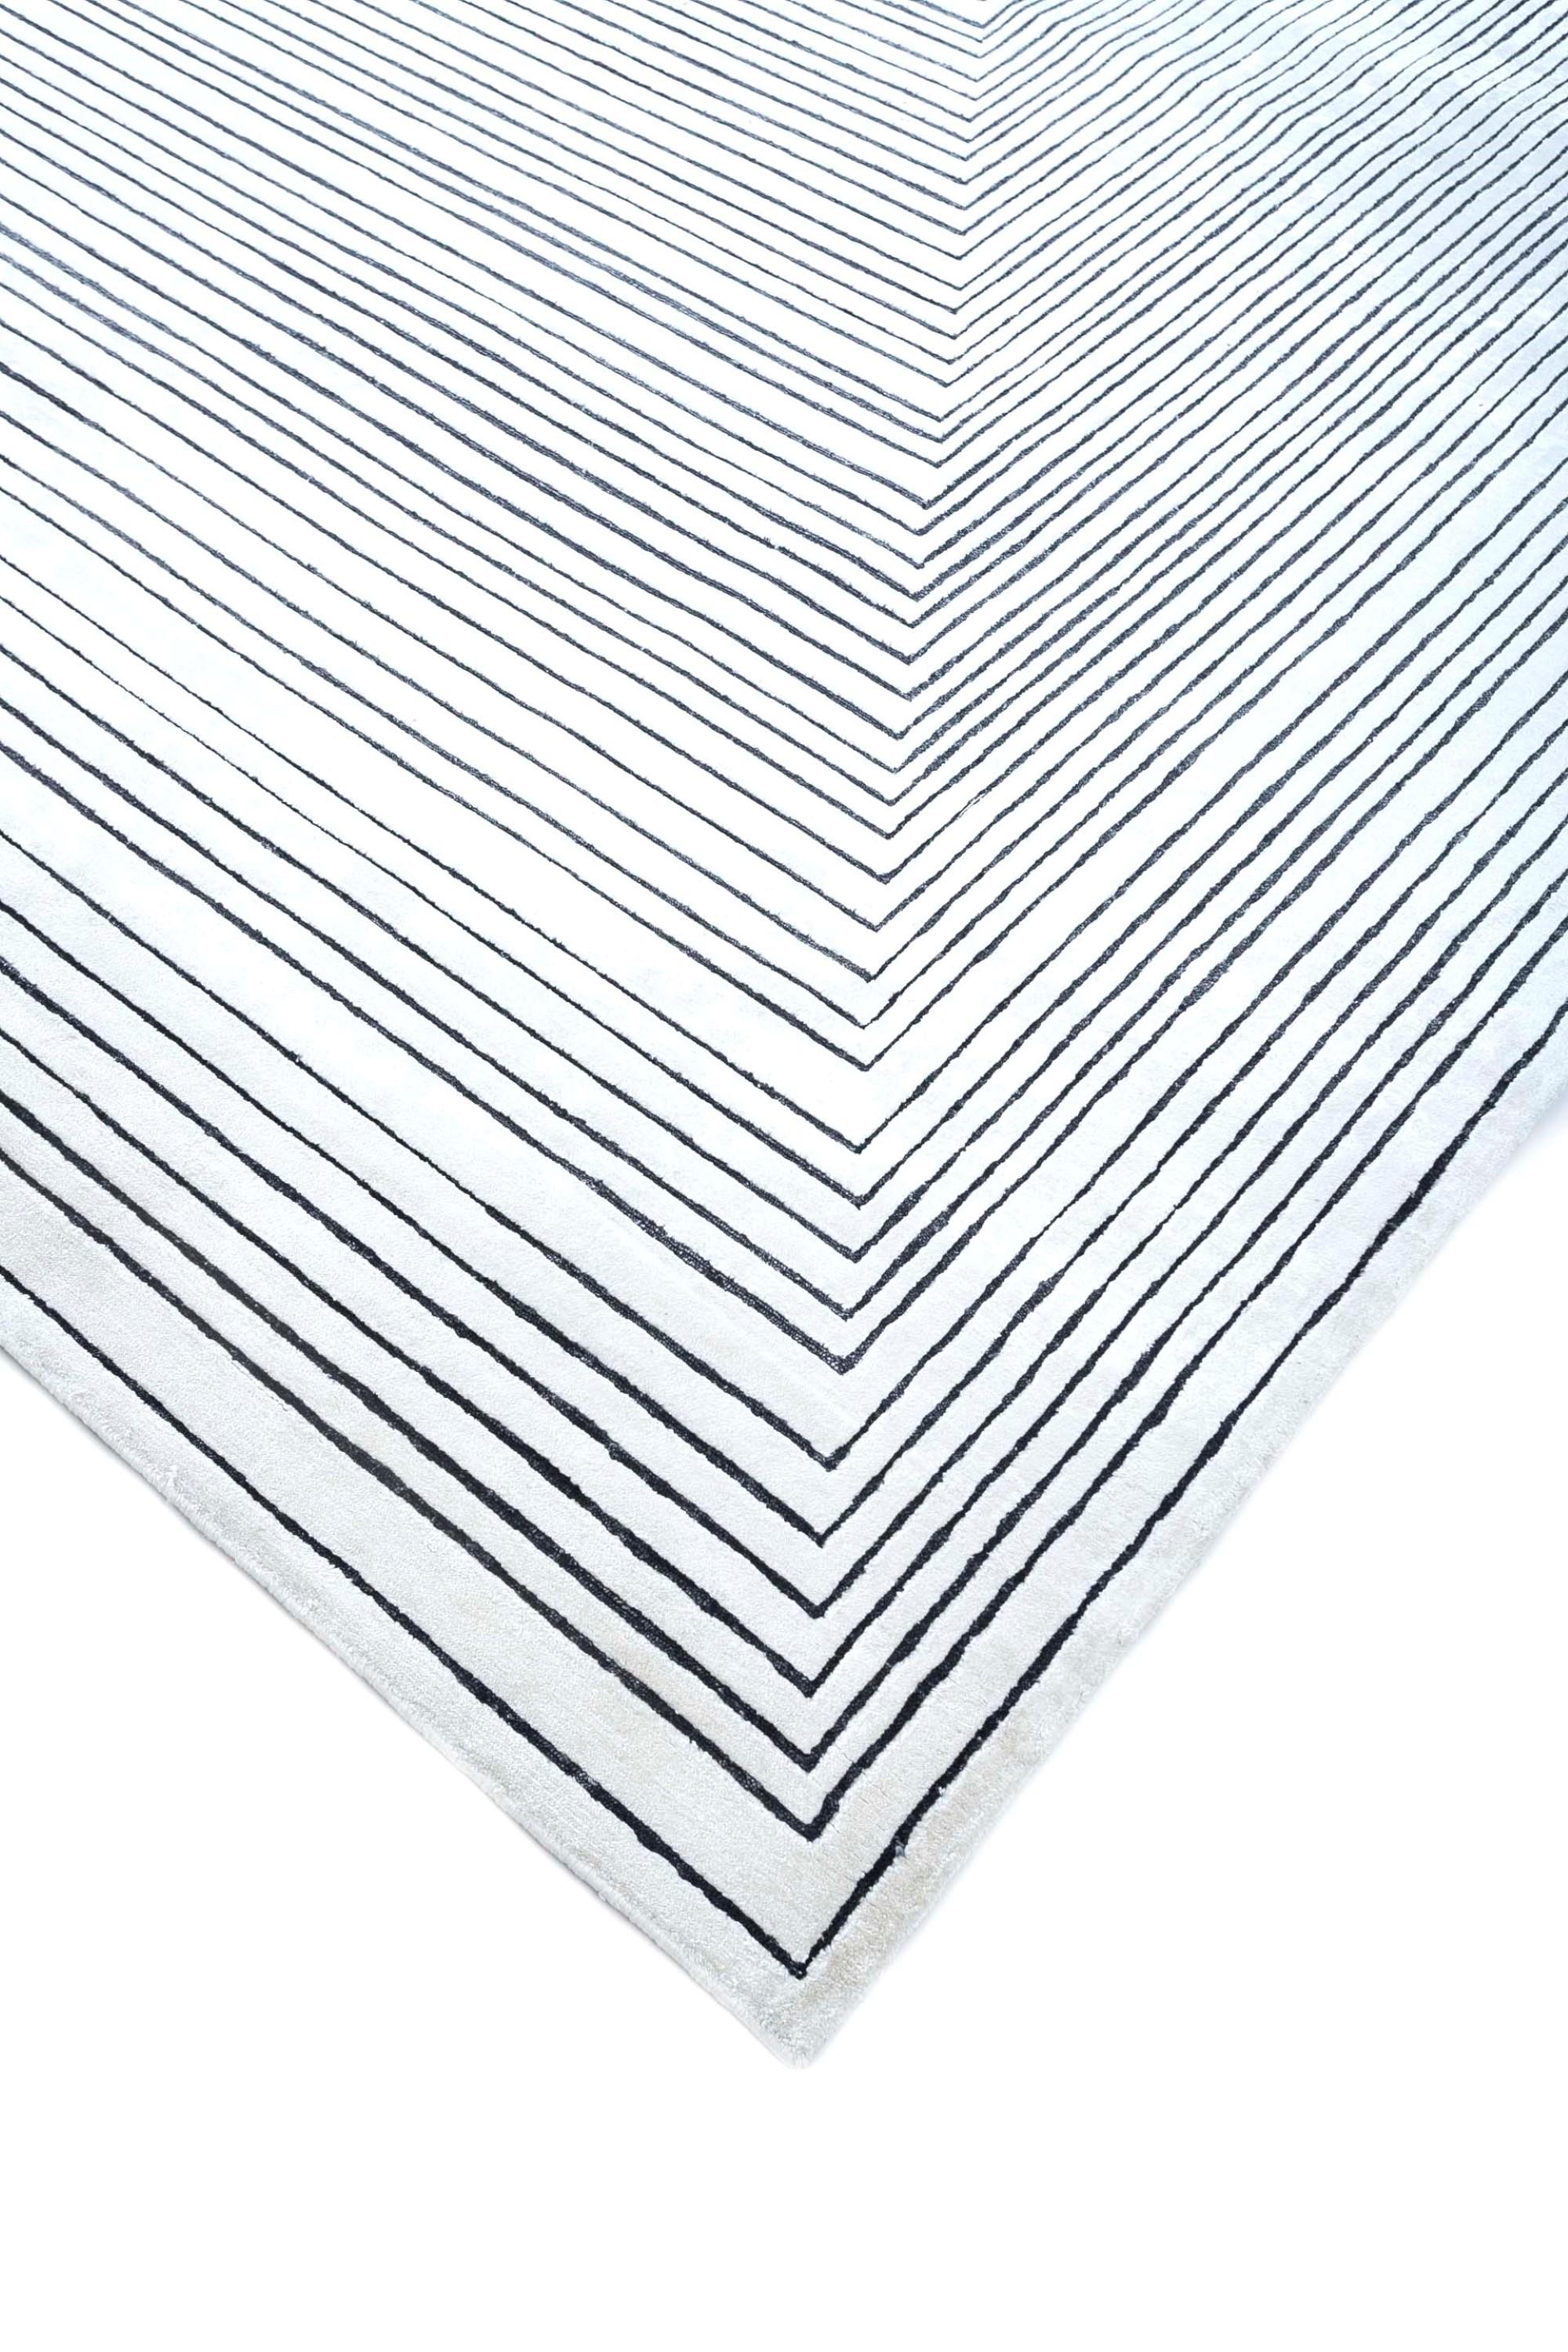 Modern Sublime Tranquil White & Ebony 300X420 cm Handknotted Rug For Sale